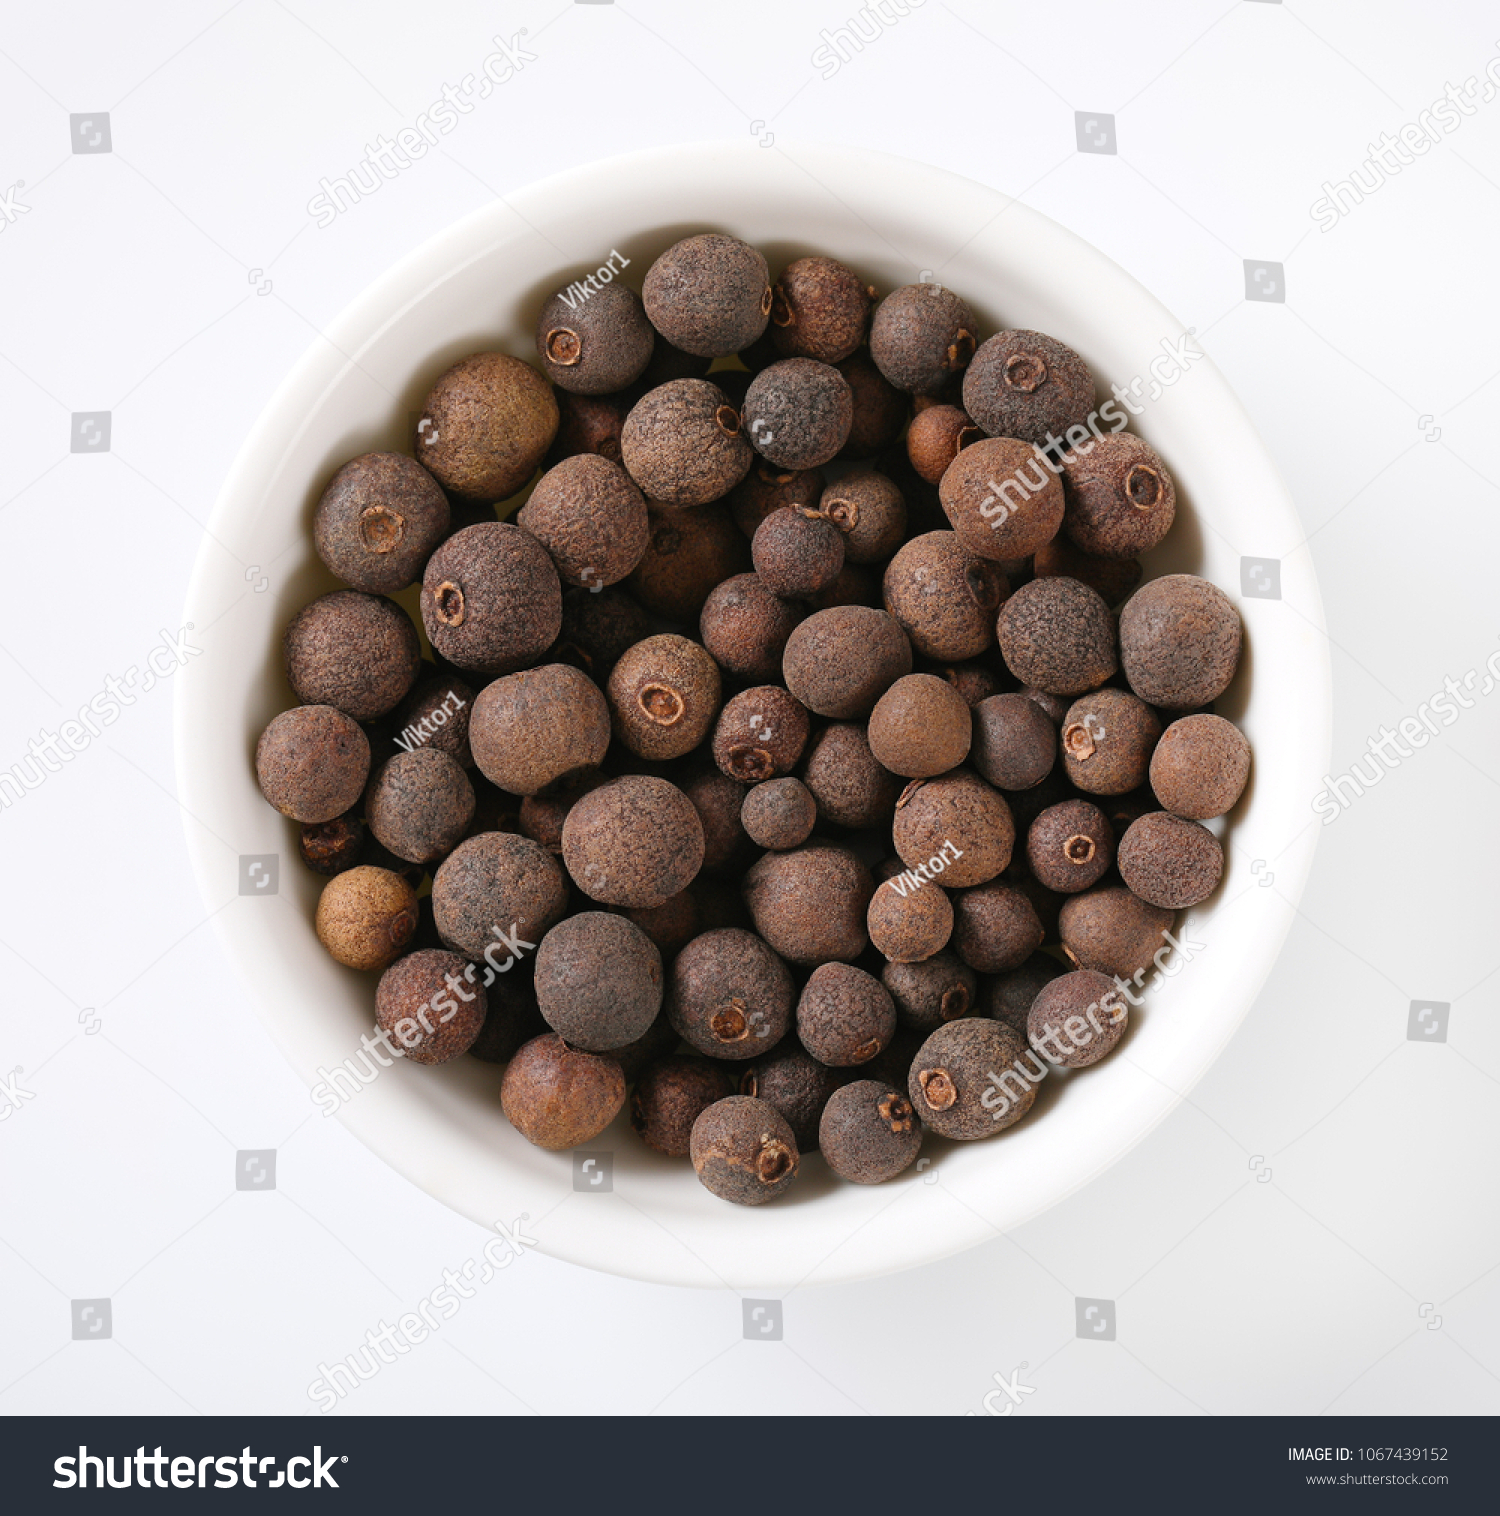 bowl of allspice berries on white background #1067439152